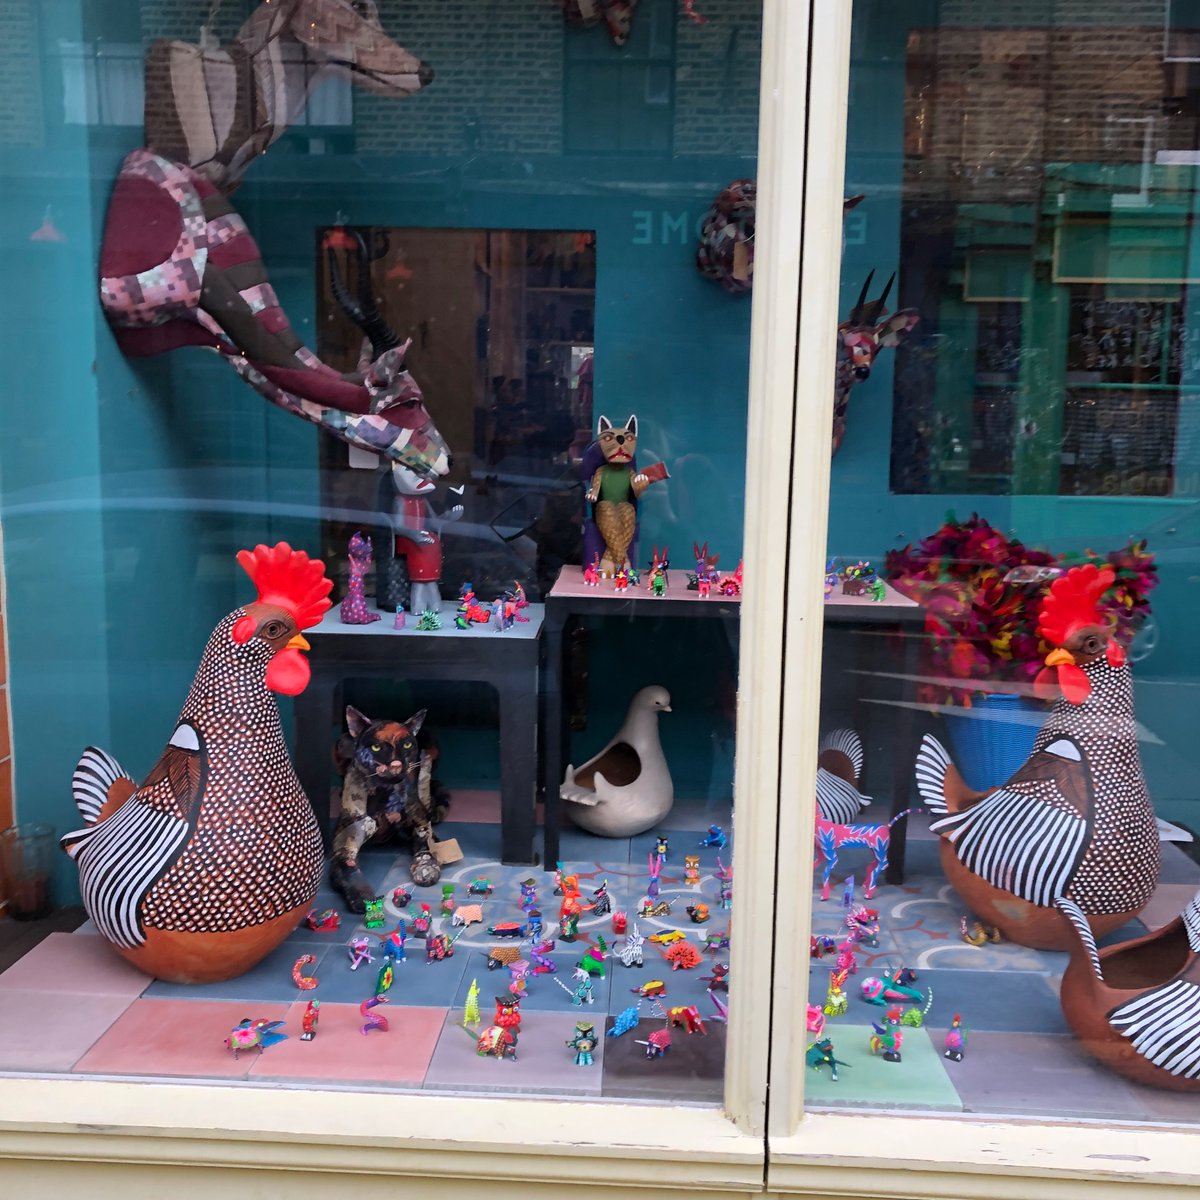 #columbiaroad #eastlondon is always an #inspiration …the Mexican shop #windowdisplay for #Easter